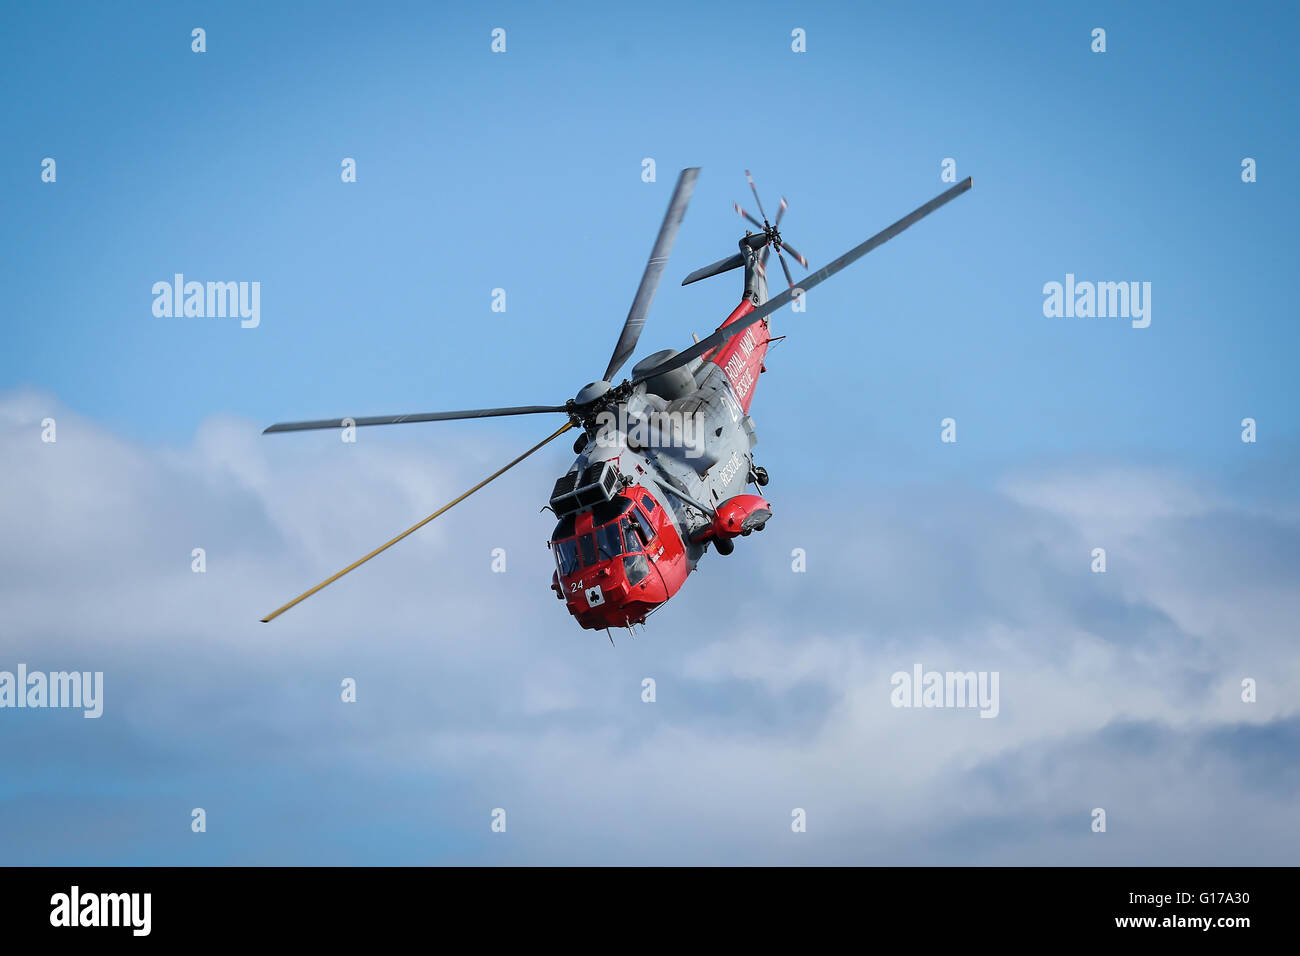 Helicopter performs rescue mission during air show Stock Photo